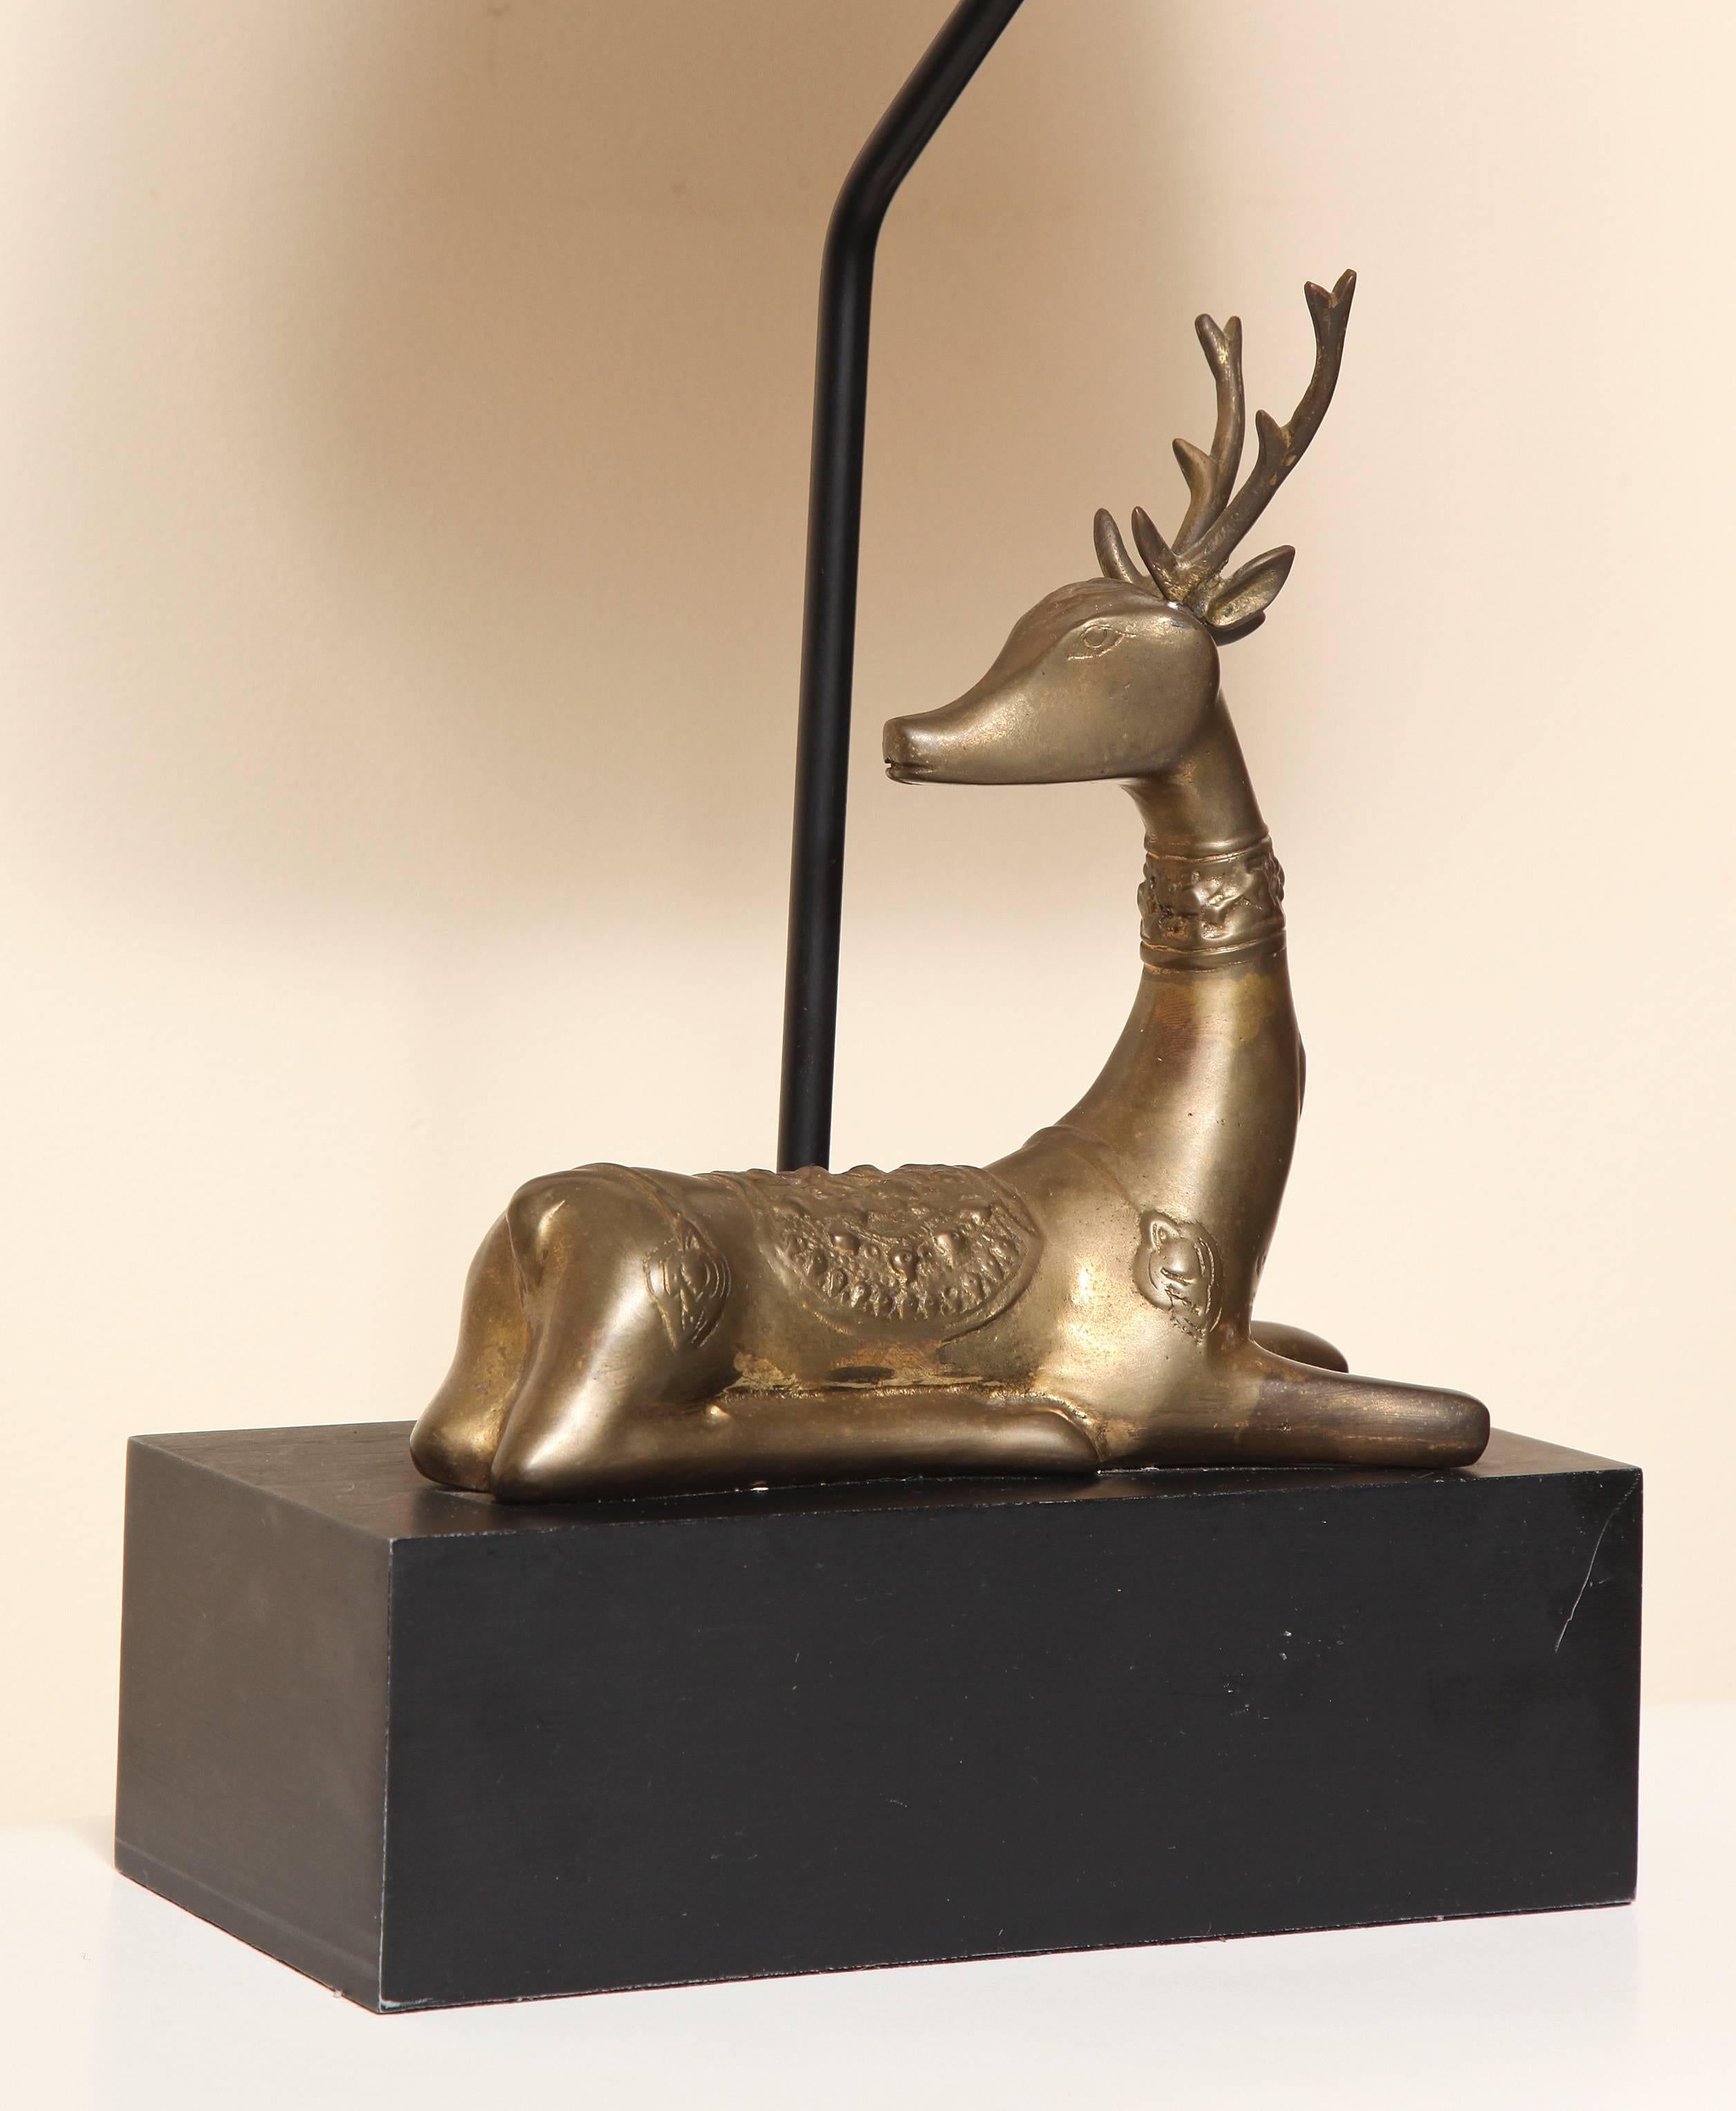 A brass deer mounted table lamp on a rectangular block wood plinth with painted ball finial. Made by Chapman, with label, dated 1977.